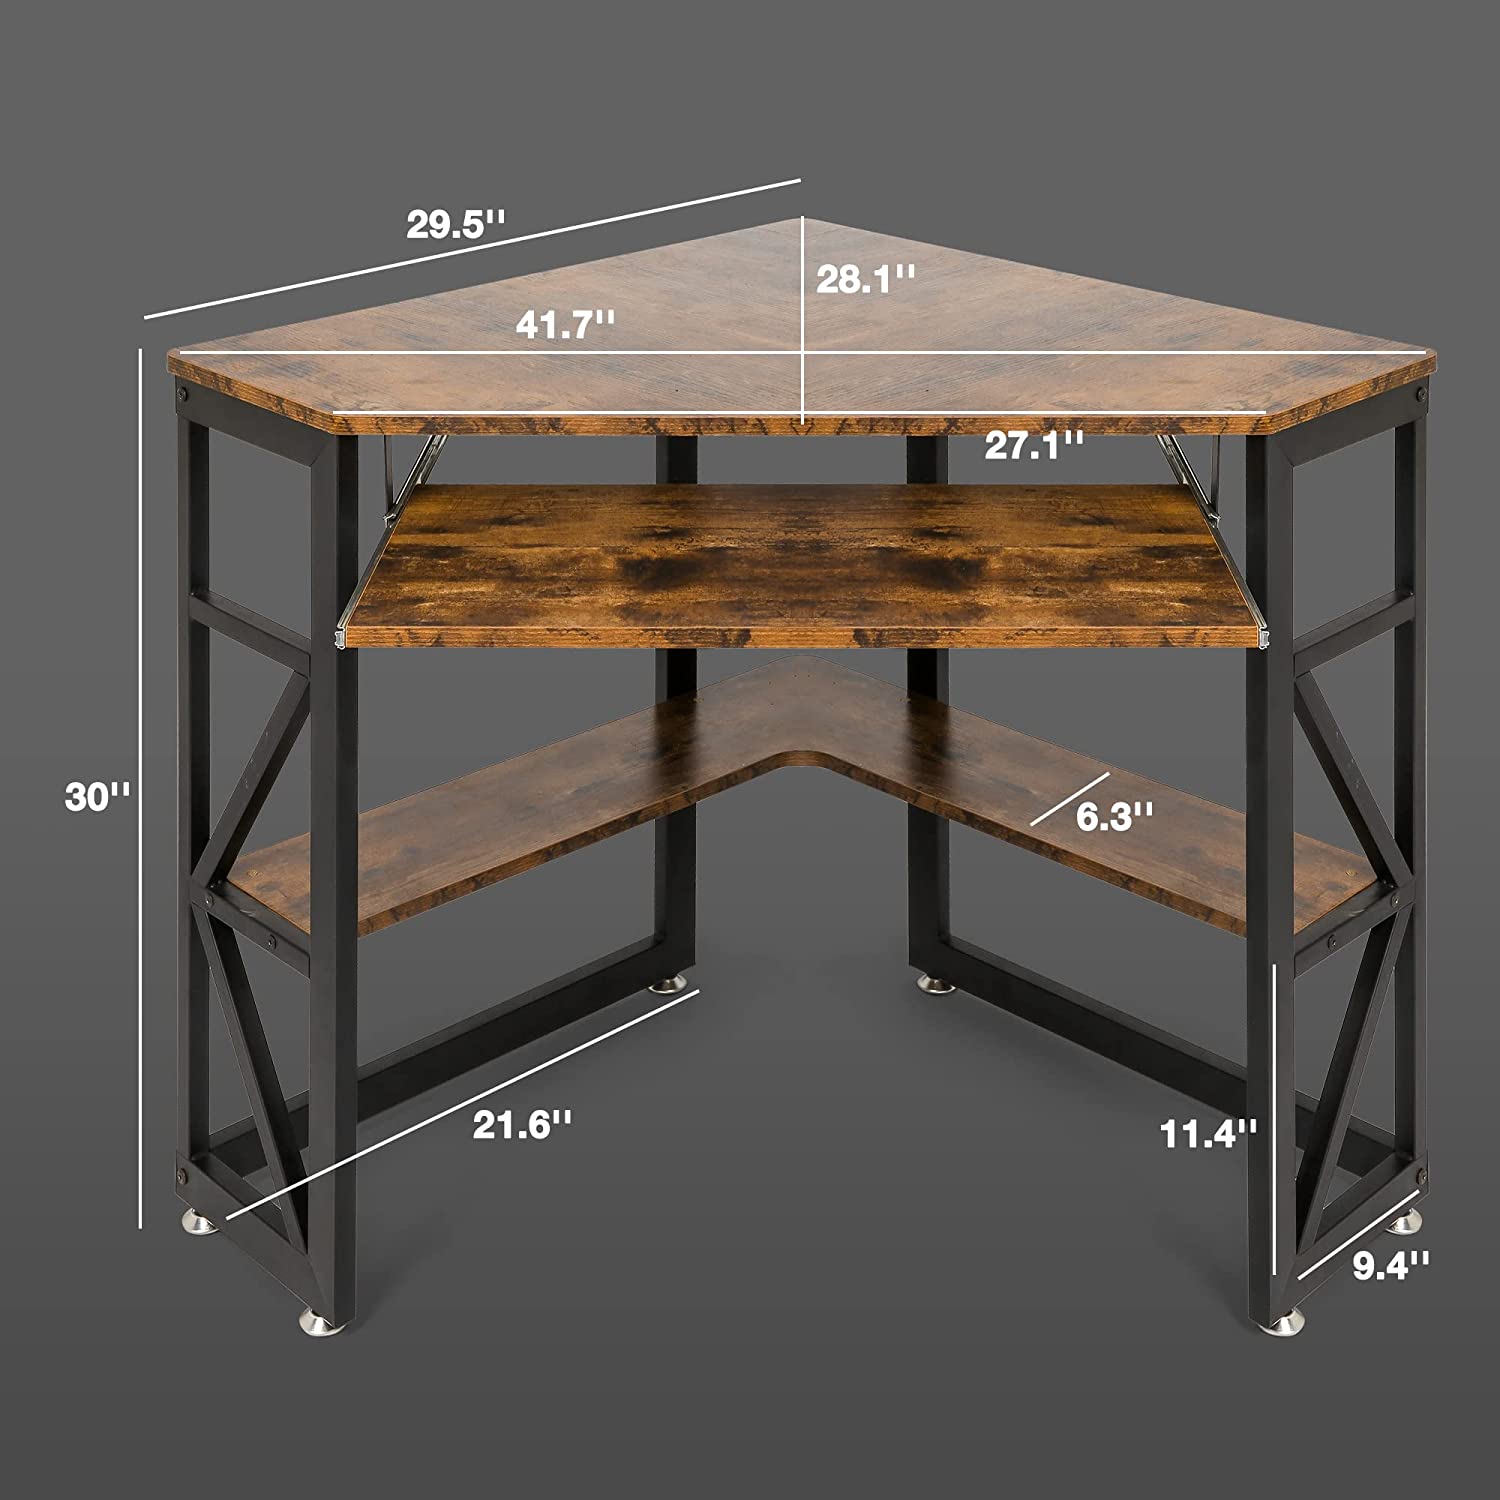 (Out of Stock) Triangle Computer Desk, Corner Desk w/ Keyboard Tray & Storage Shelves, Small Desk Steel Frame, Rustic Brown